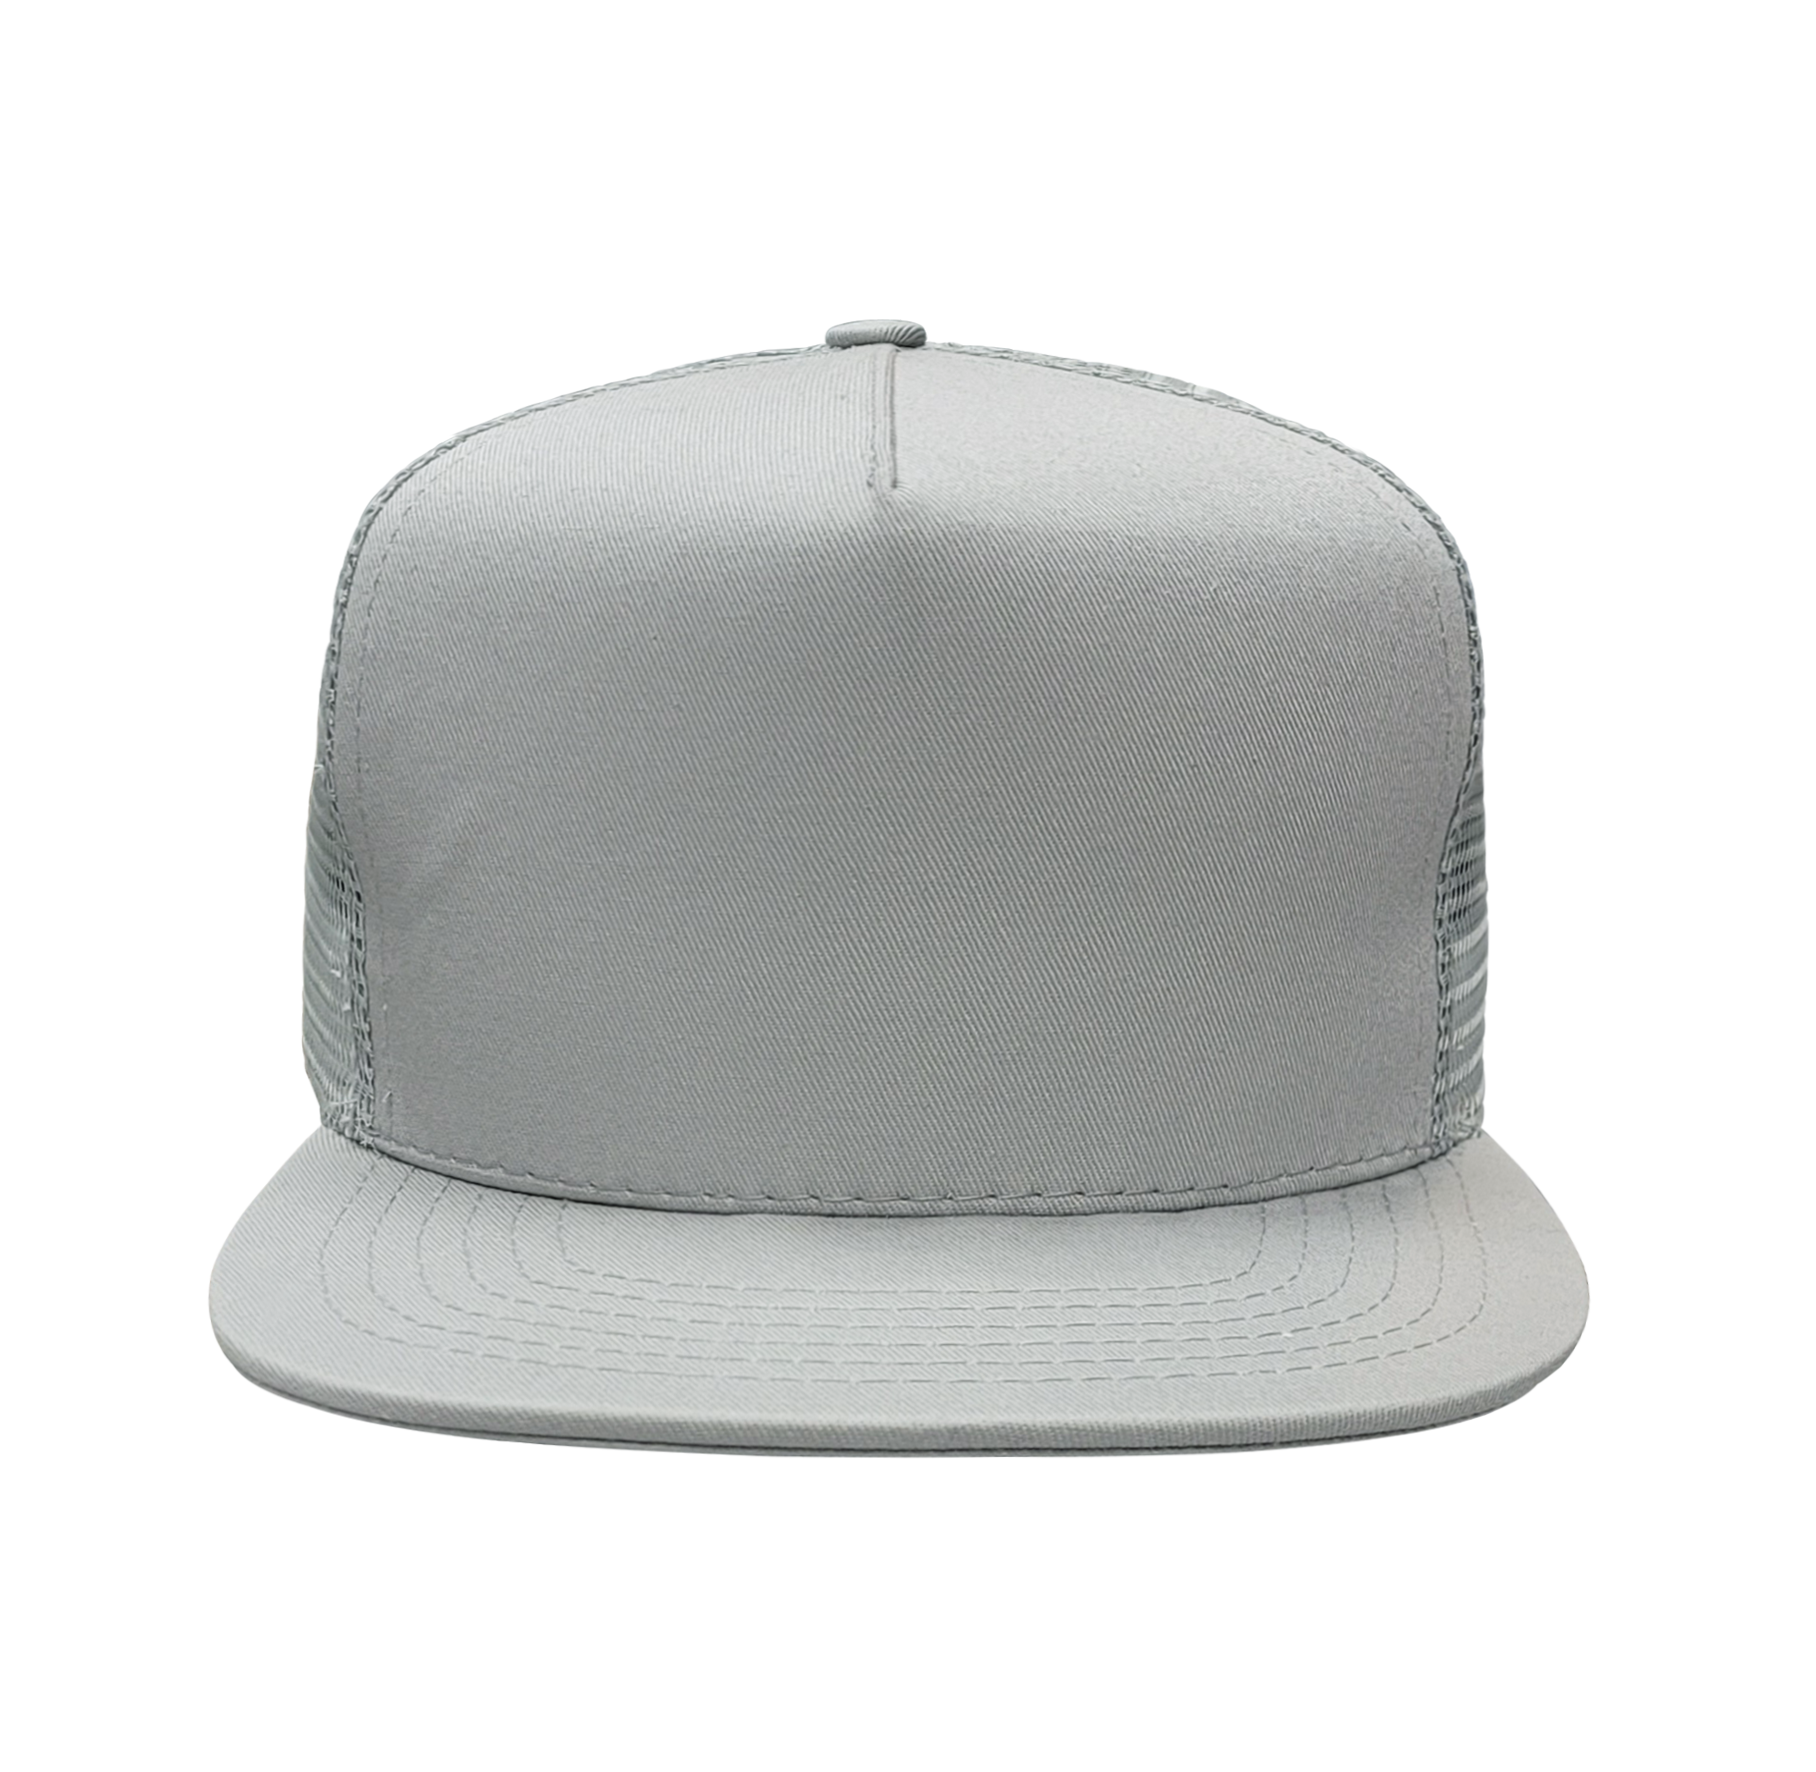 5 Panel Structured - US03